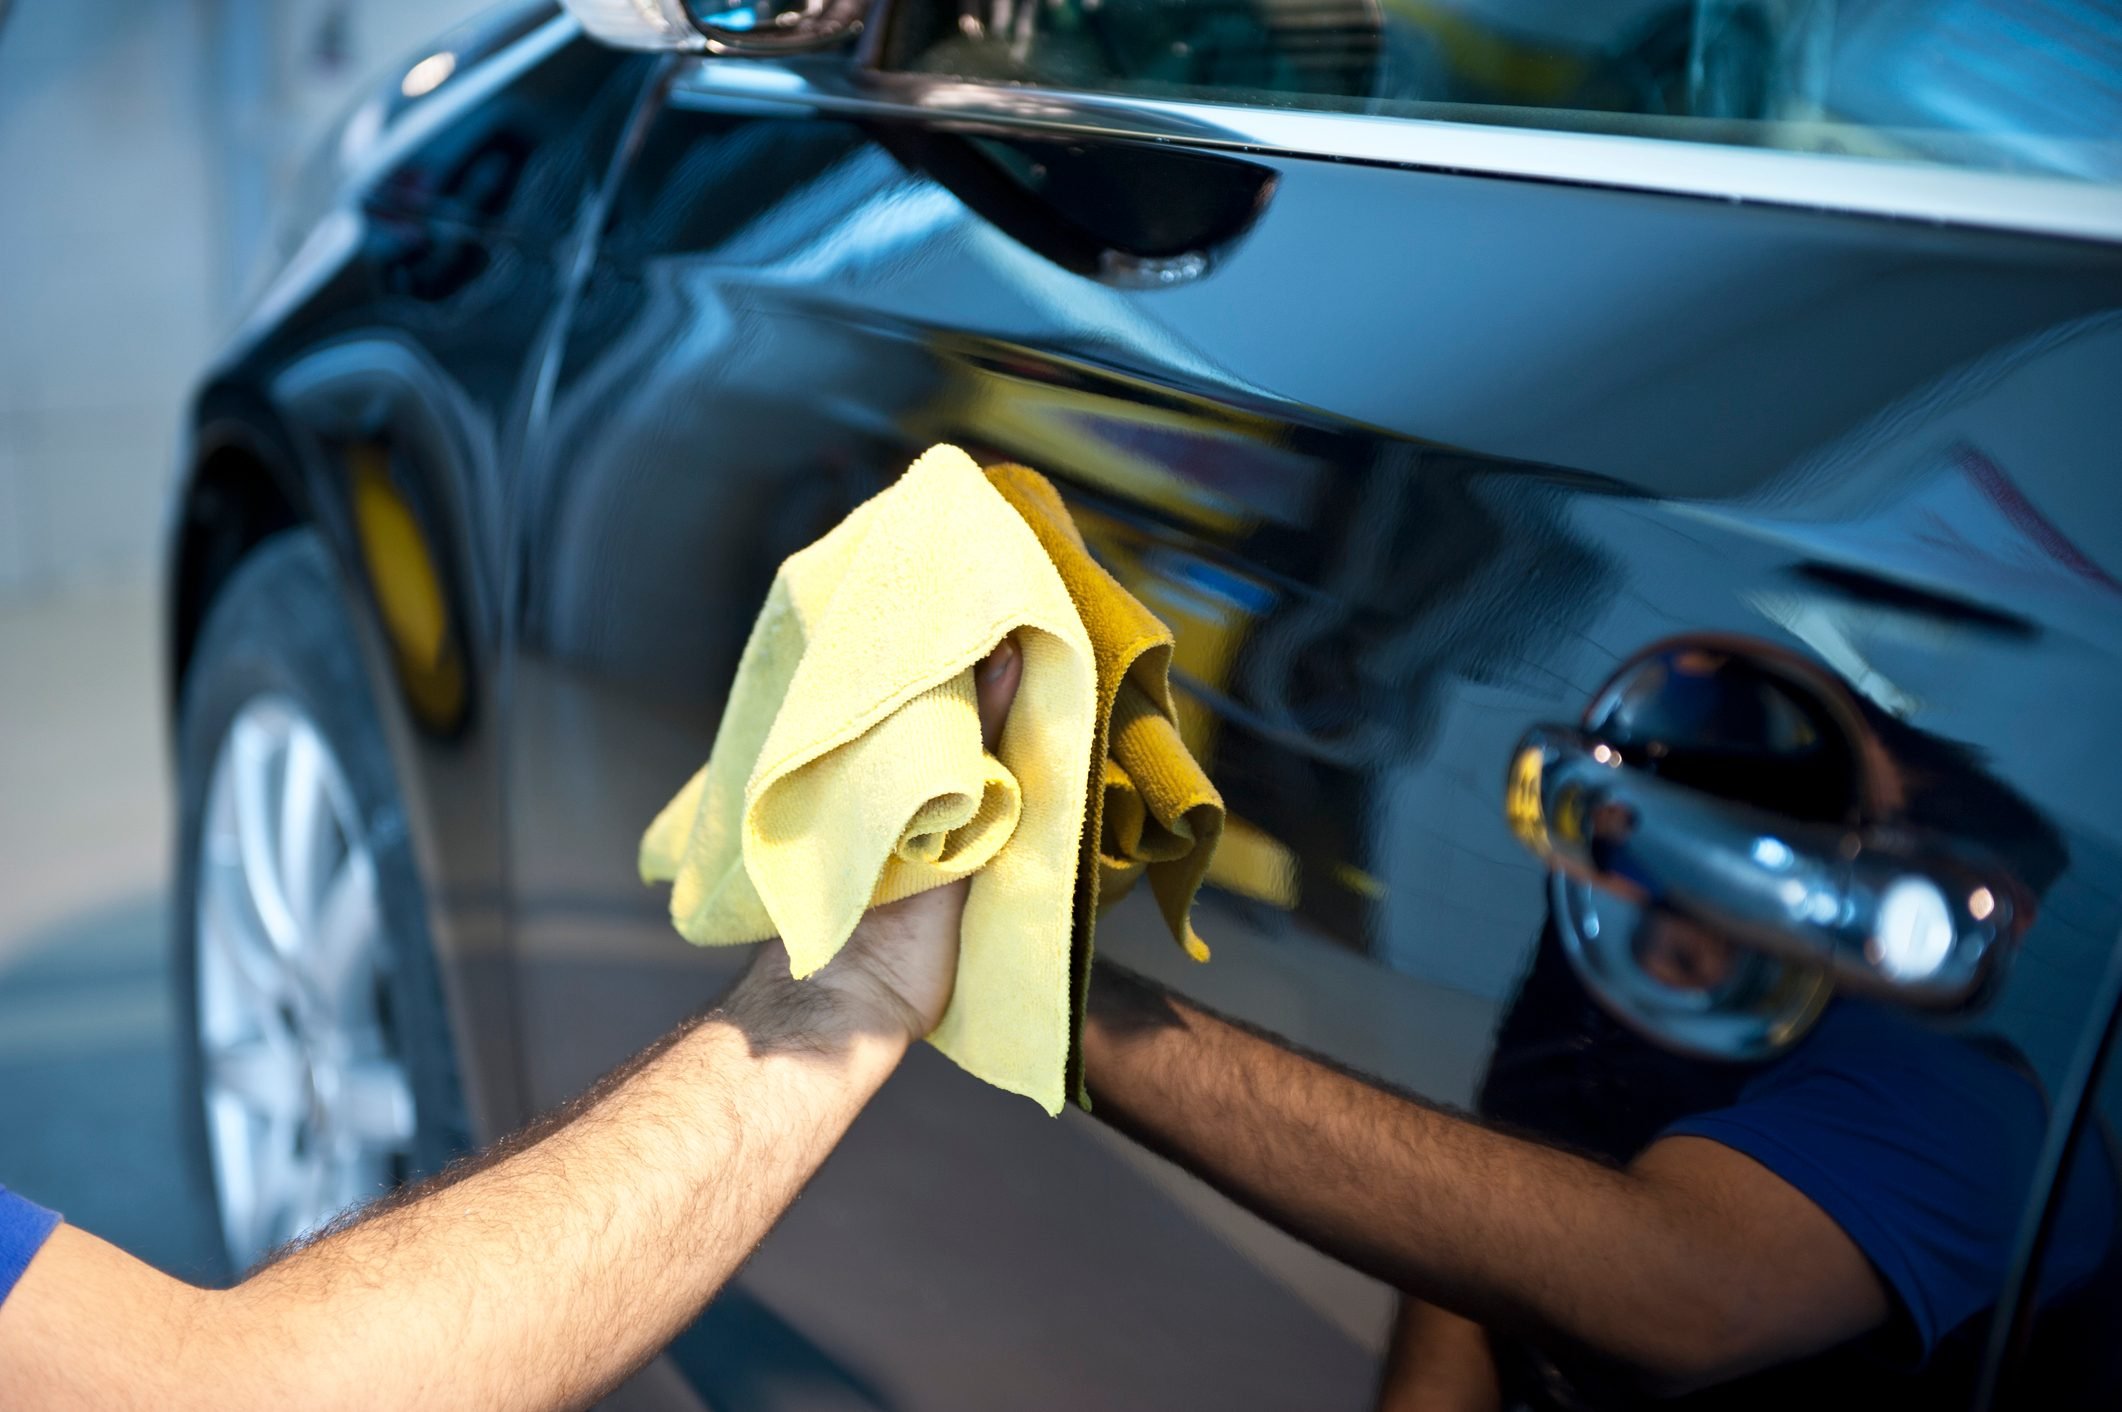 What Is the Best Way for Your Customers to Wash Their Cars Using